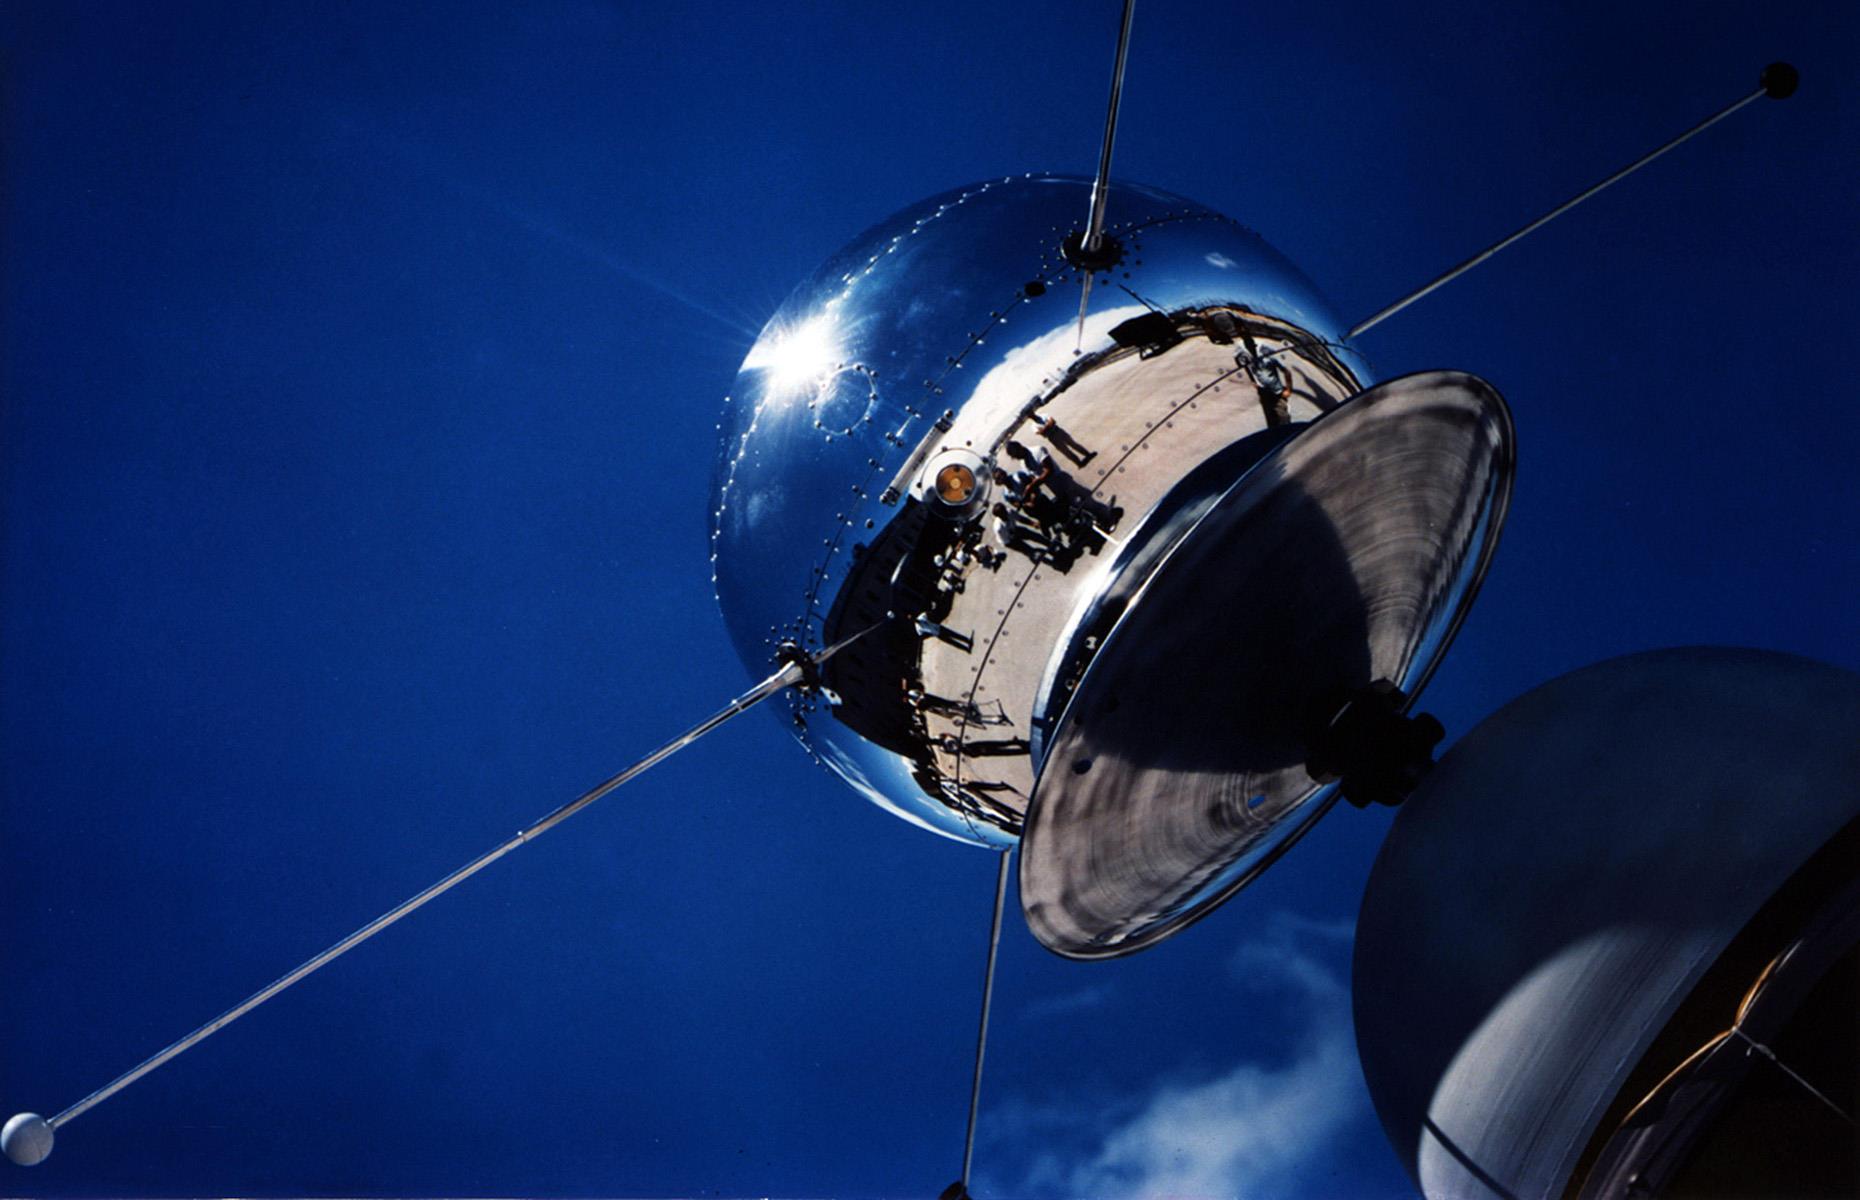 <p>Vanguard 1 was the fourth artificial satellite and the first to boast solar power. Launched on March 17, 1958, the American spacecraft is also the oldest satellite still in orbit. A "derelict object," it's expected to stay there for several hundred years.</p>  <p>This image shows the satellite at Cape Canaveral ahead of launch.</p>